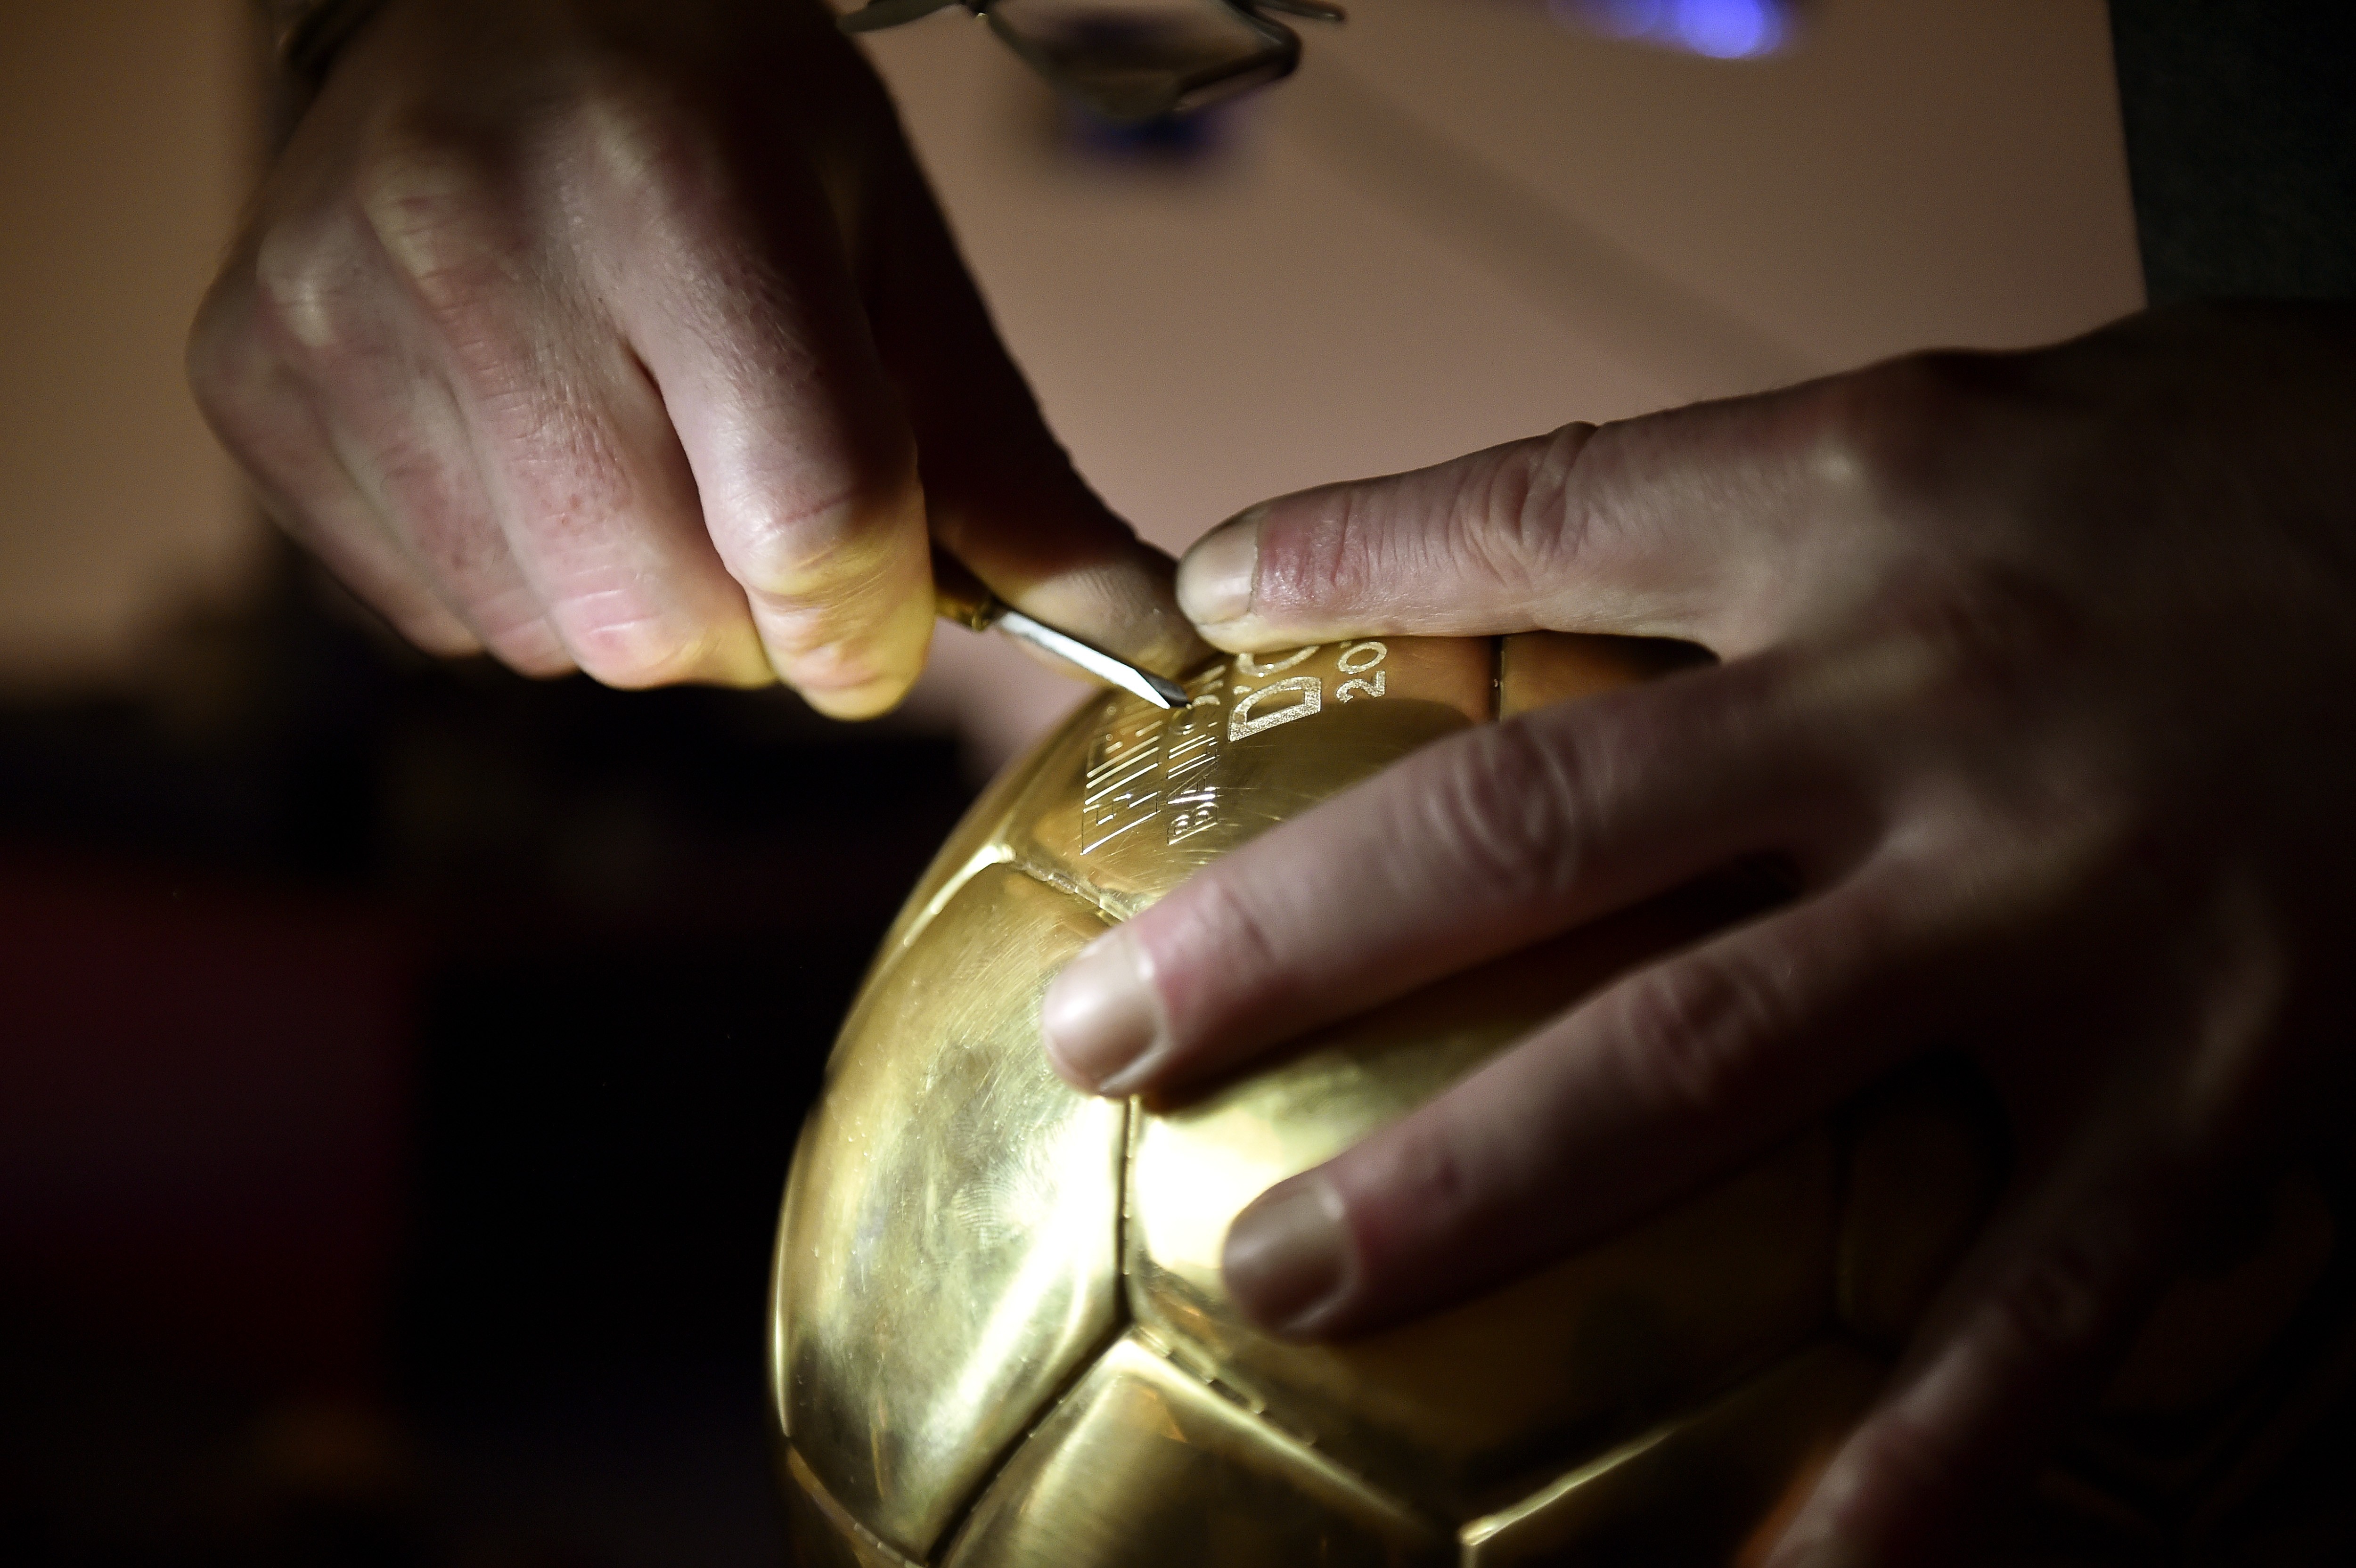 An engraver works on the "Ballon D'or" in Paris on December 2 2014, at the French jewelry house Mellerio. Neuer, Messi, Ronaldo were chosen as top three candidates for FIFA Ballon d'Or with the winner due to be announced on January 12, 2014.  AFP PHOTO /  (Foto: AFP)